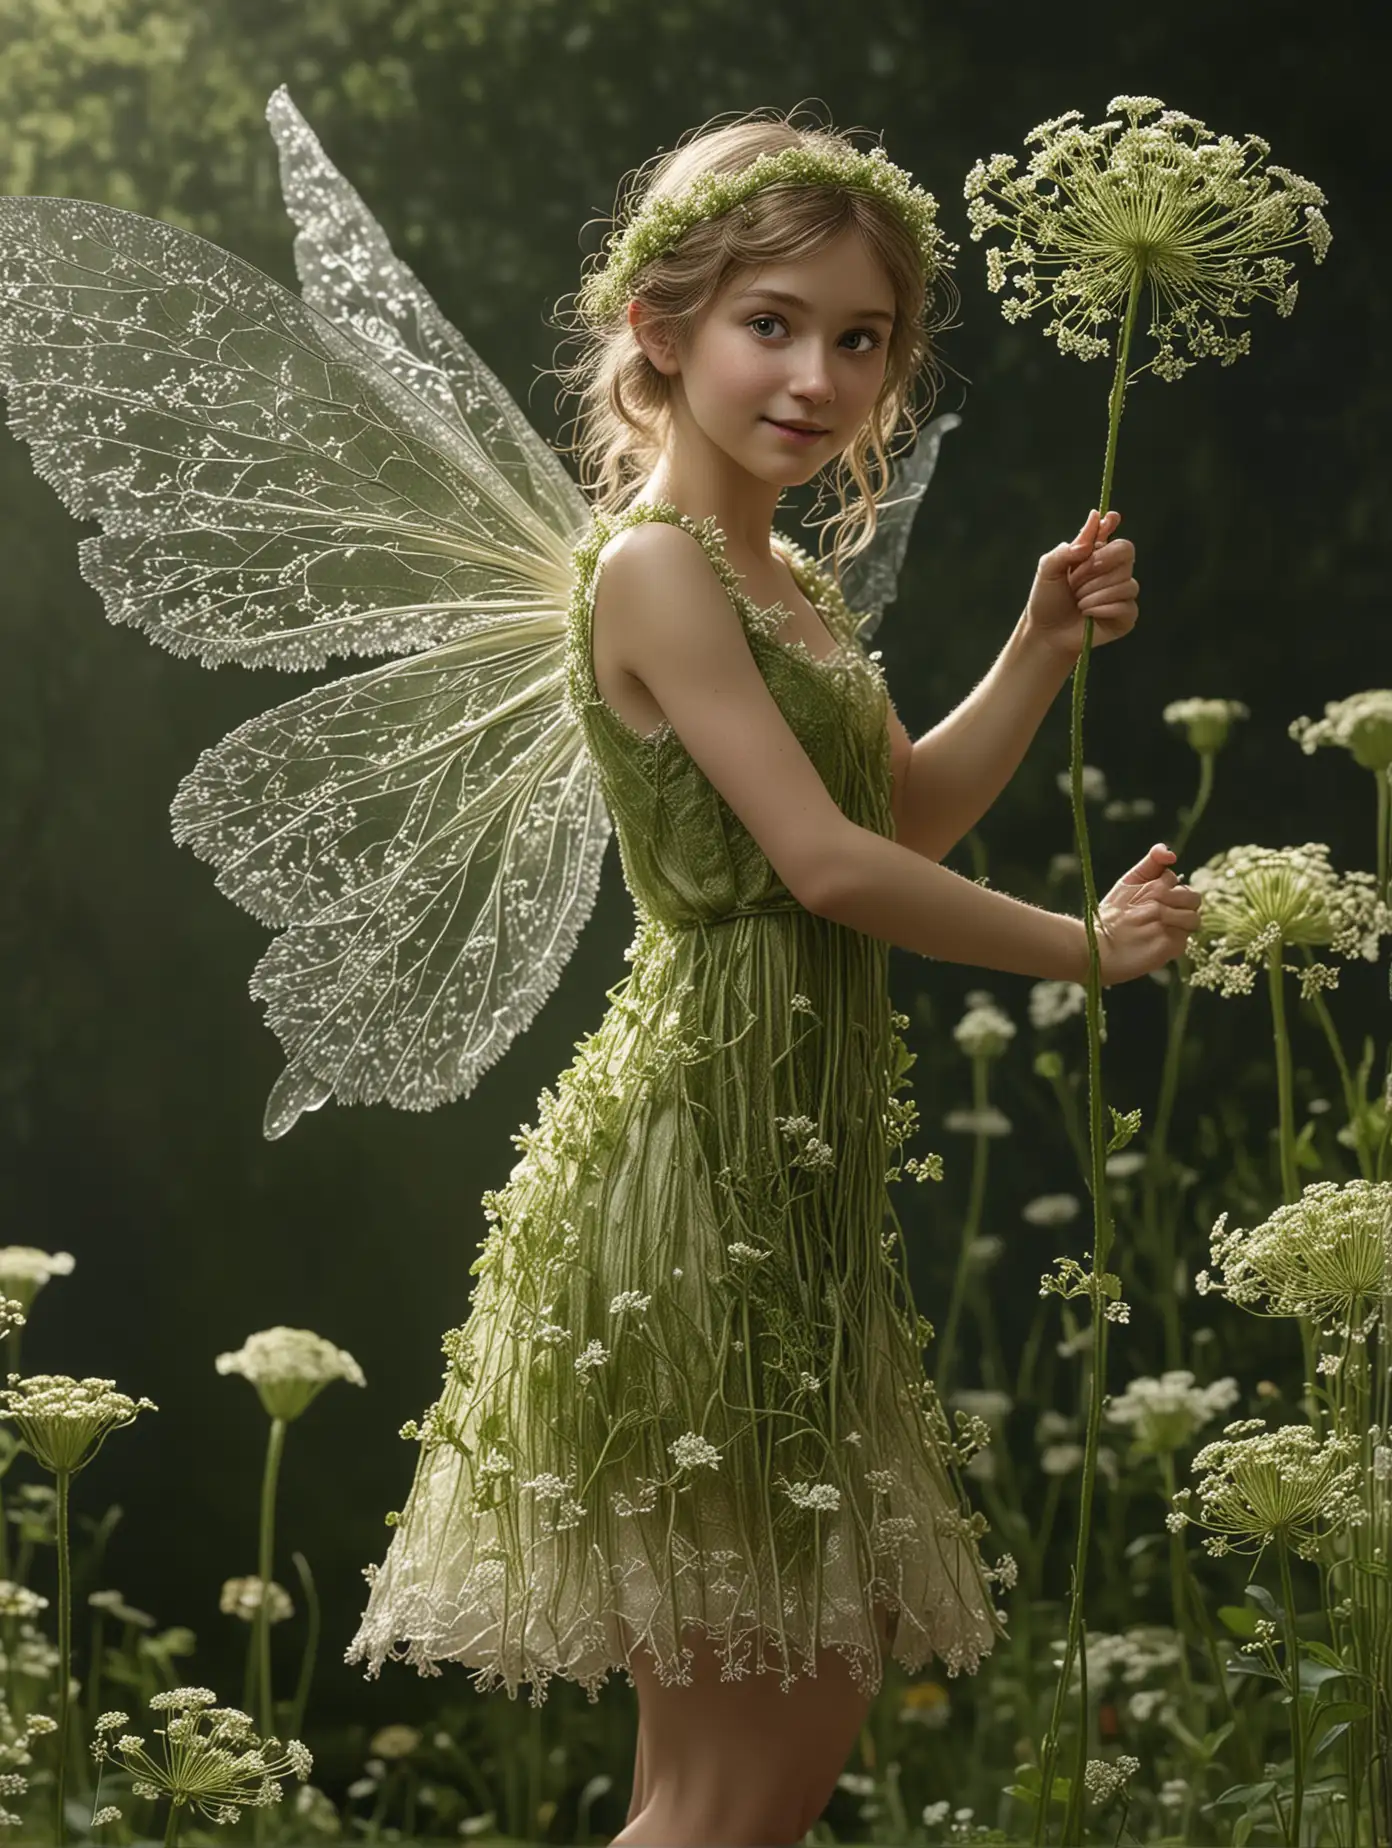 Cicely Mary Barker's Flower Fairies come to life in hyper-realistic, 4k, extremely detailed, full-body photograph of the Queen Anne's Lace Flower Fairy.